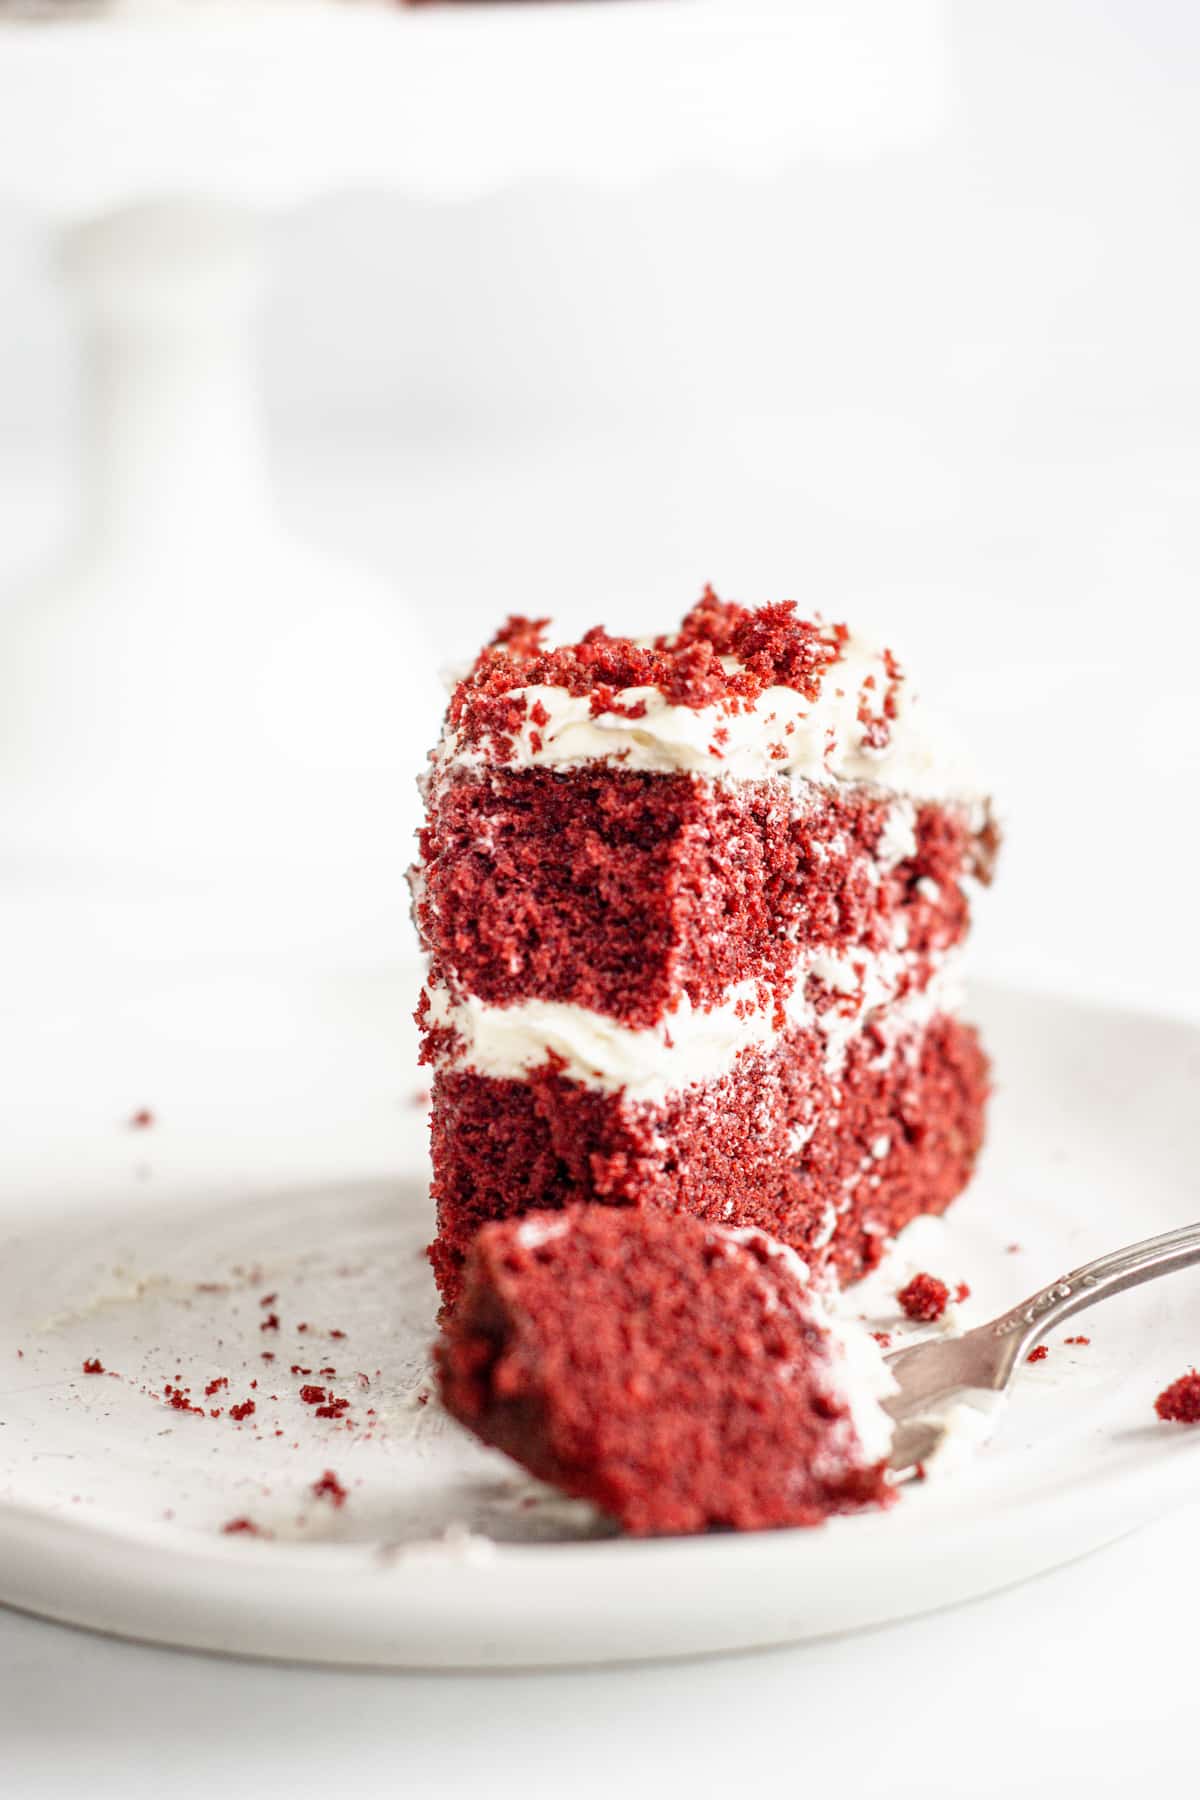 an upright slice of red cake with a fork,